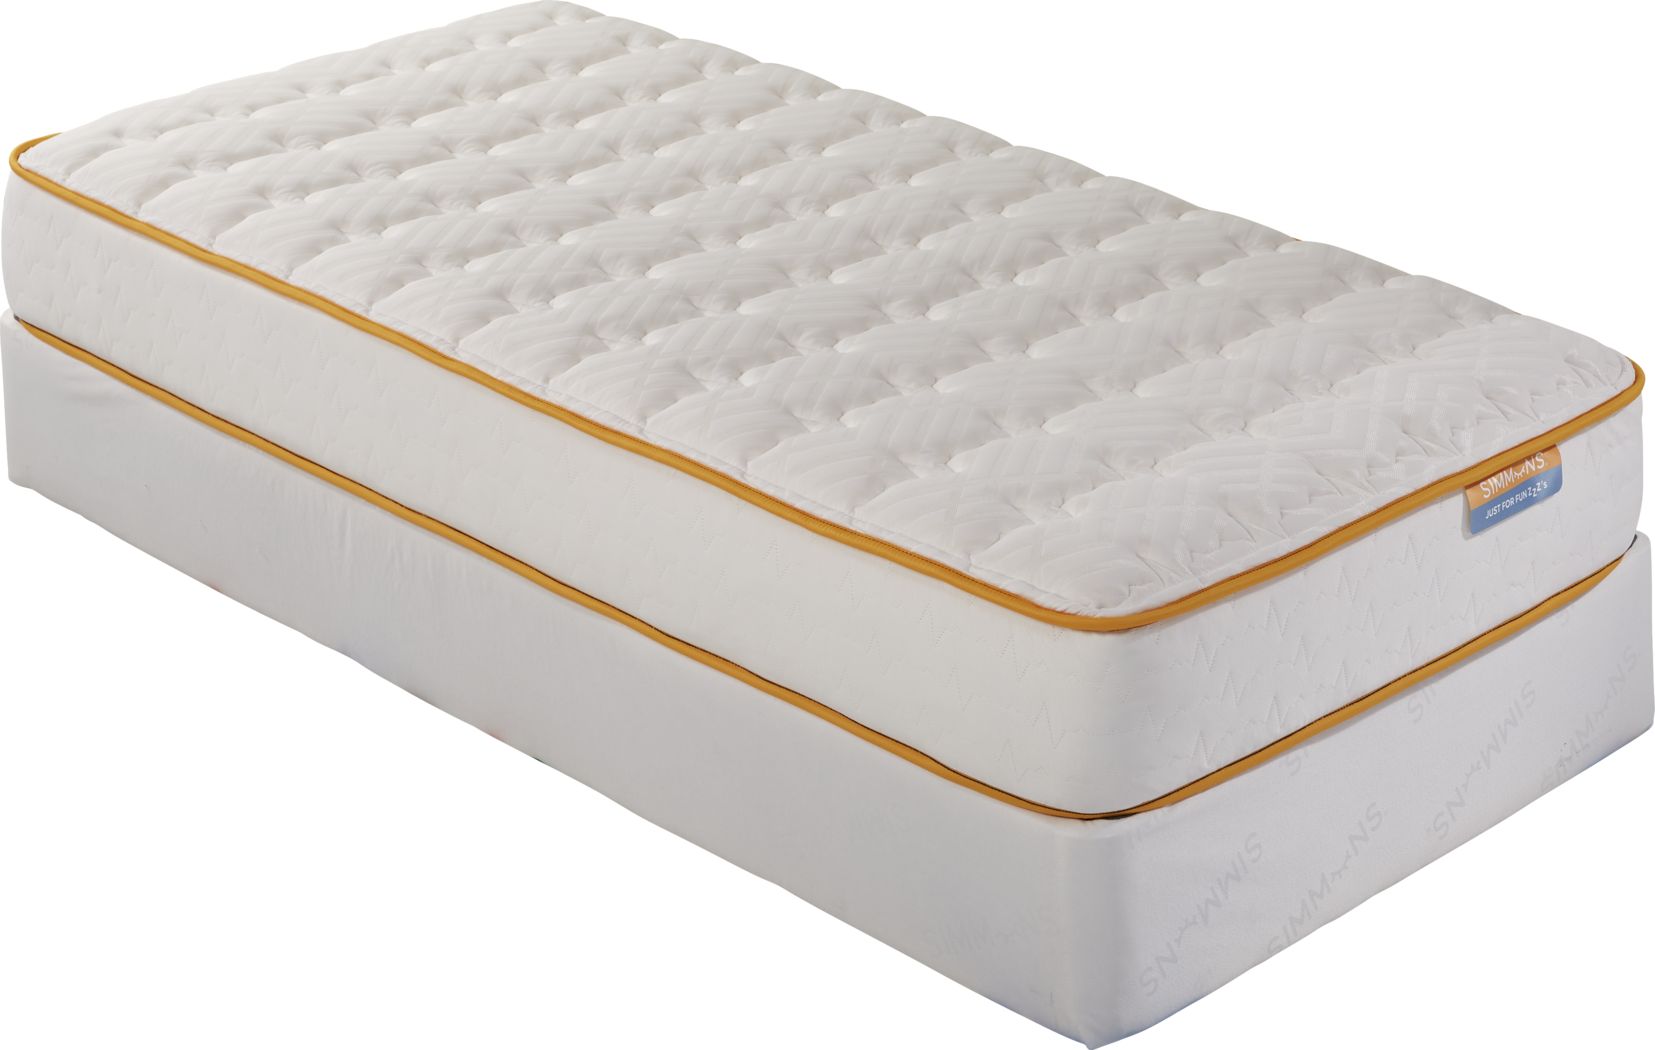 low profile twin mattress cover